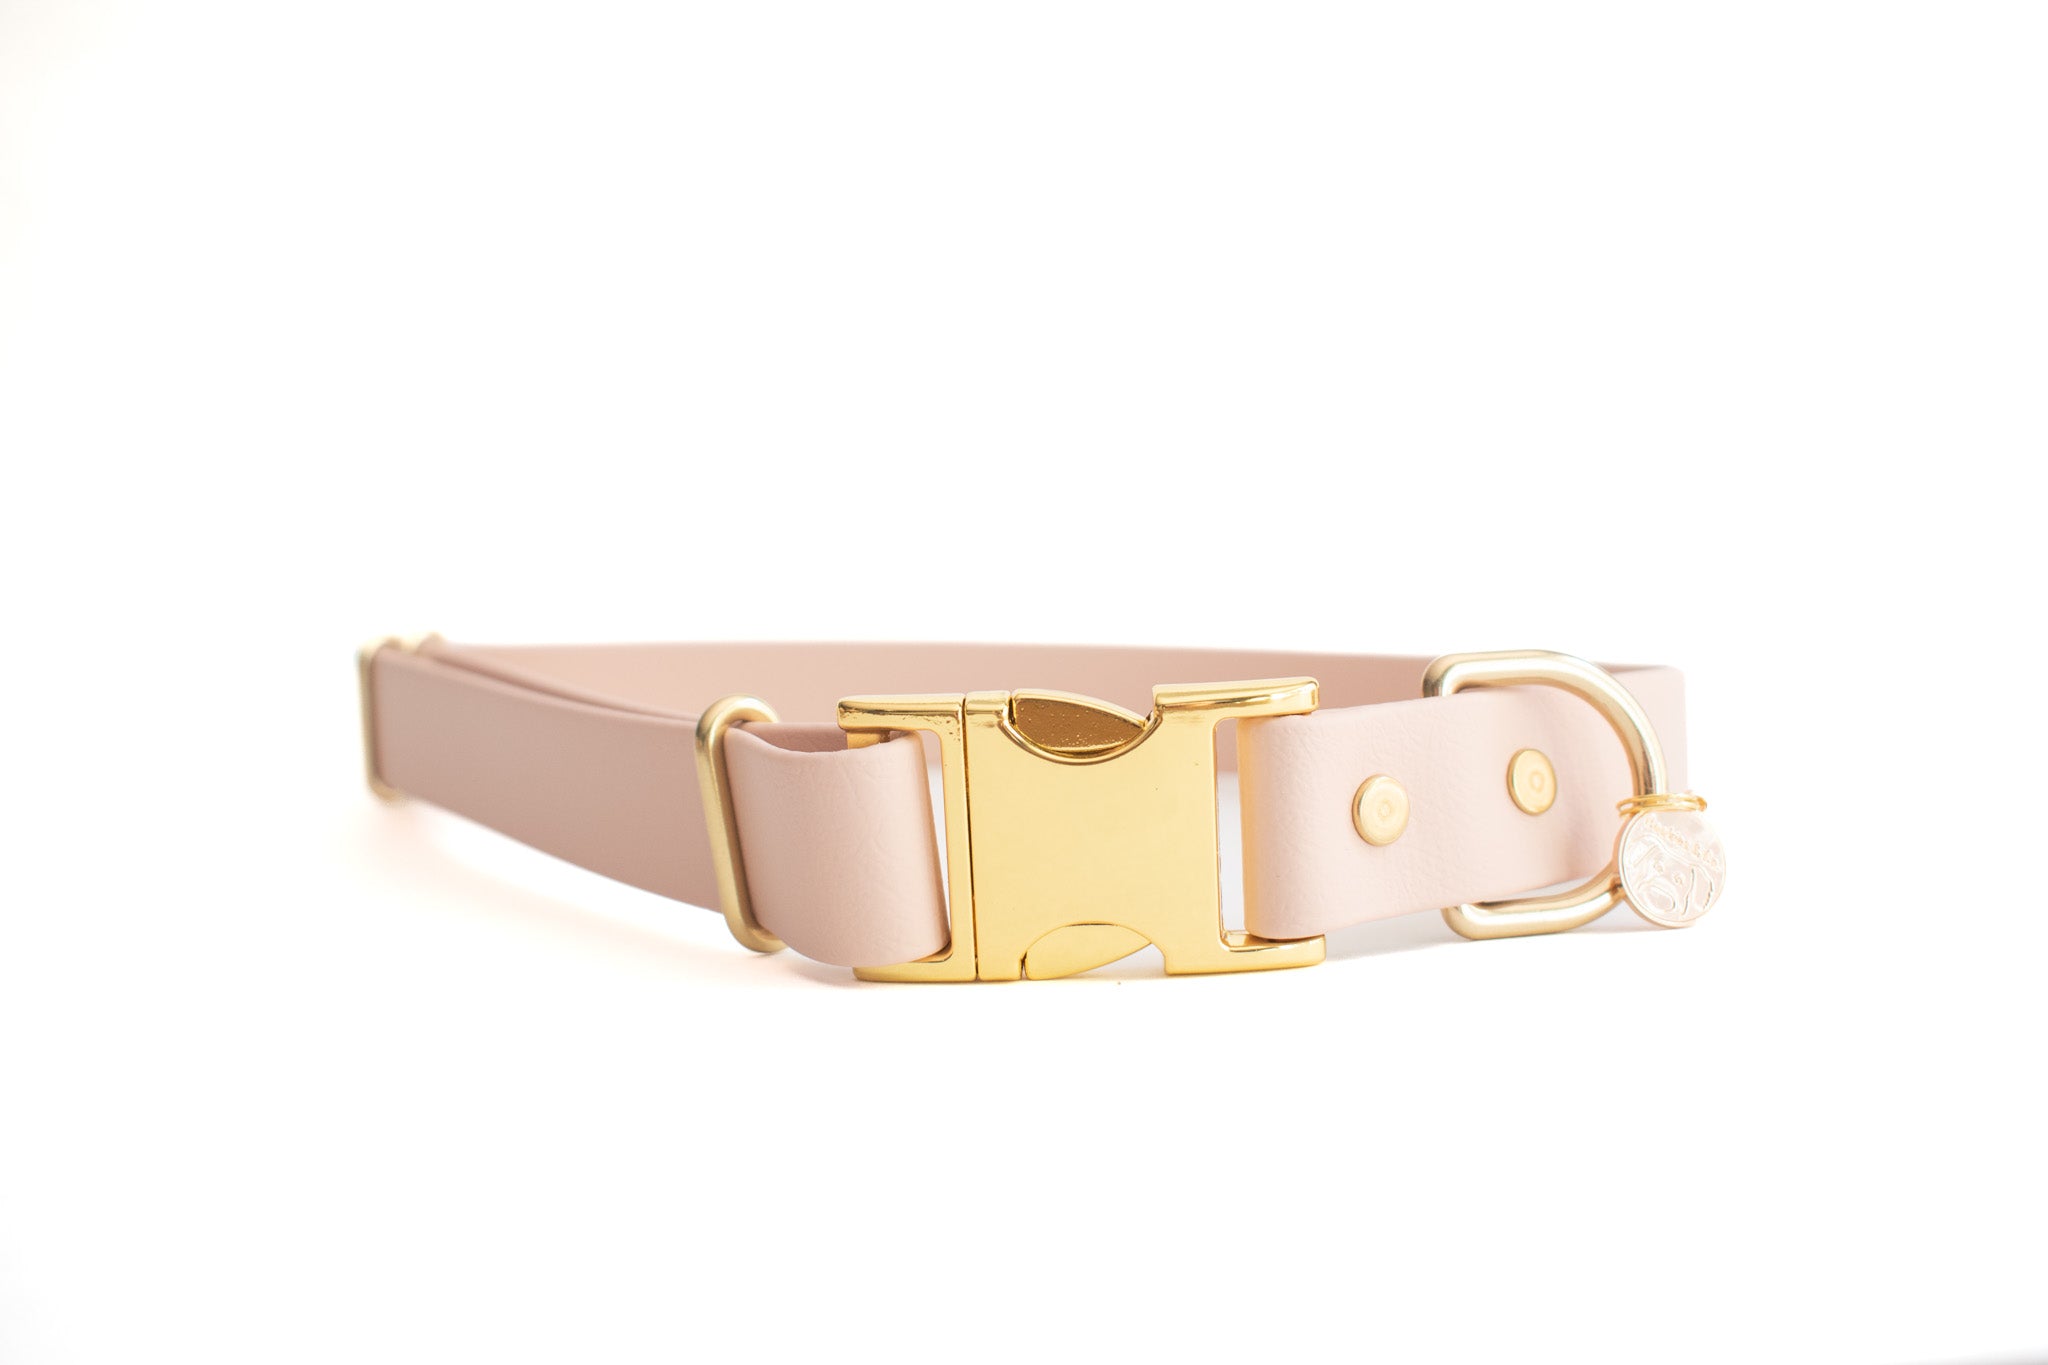 Limited Edition: White Peach Color - Adjustable Quick Release Collar